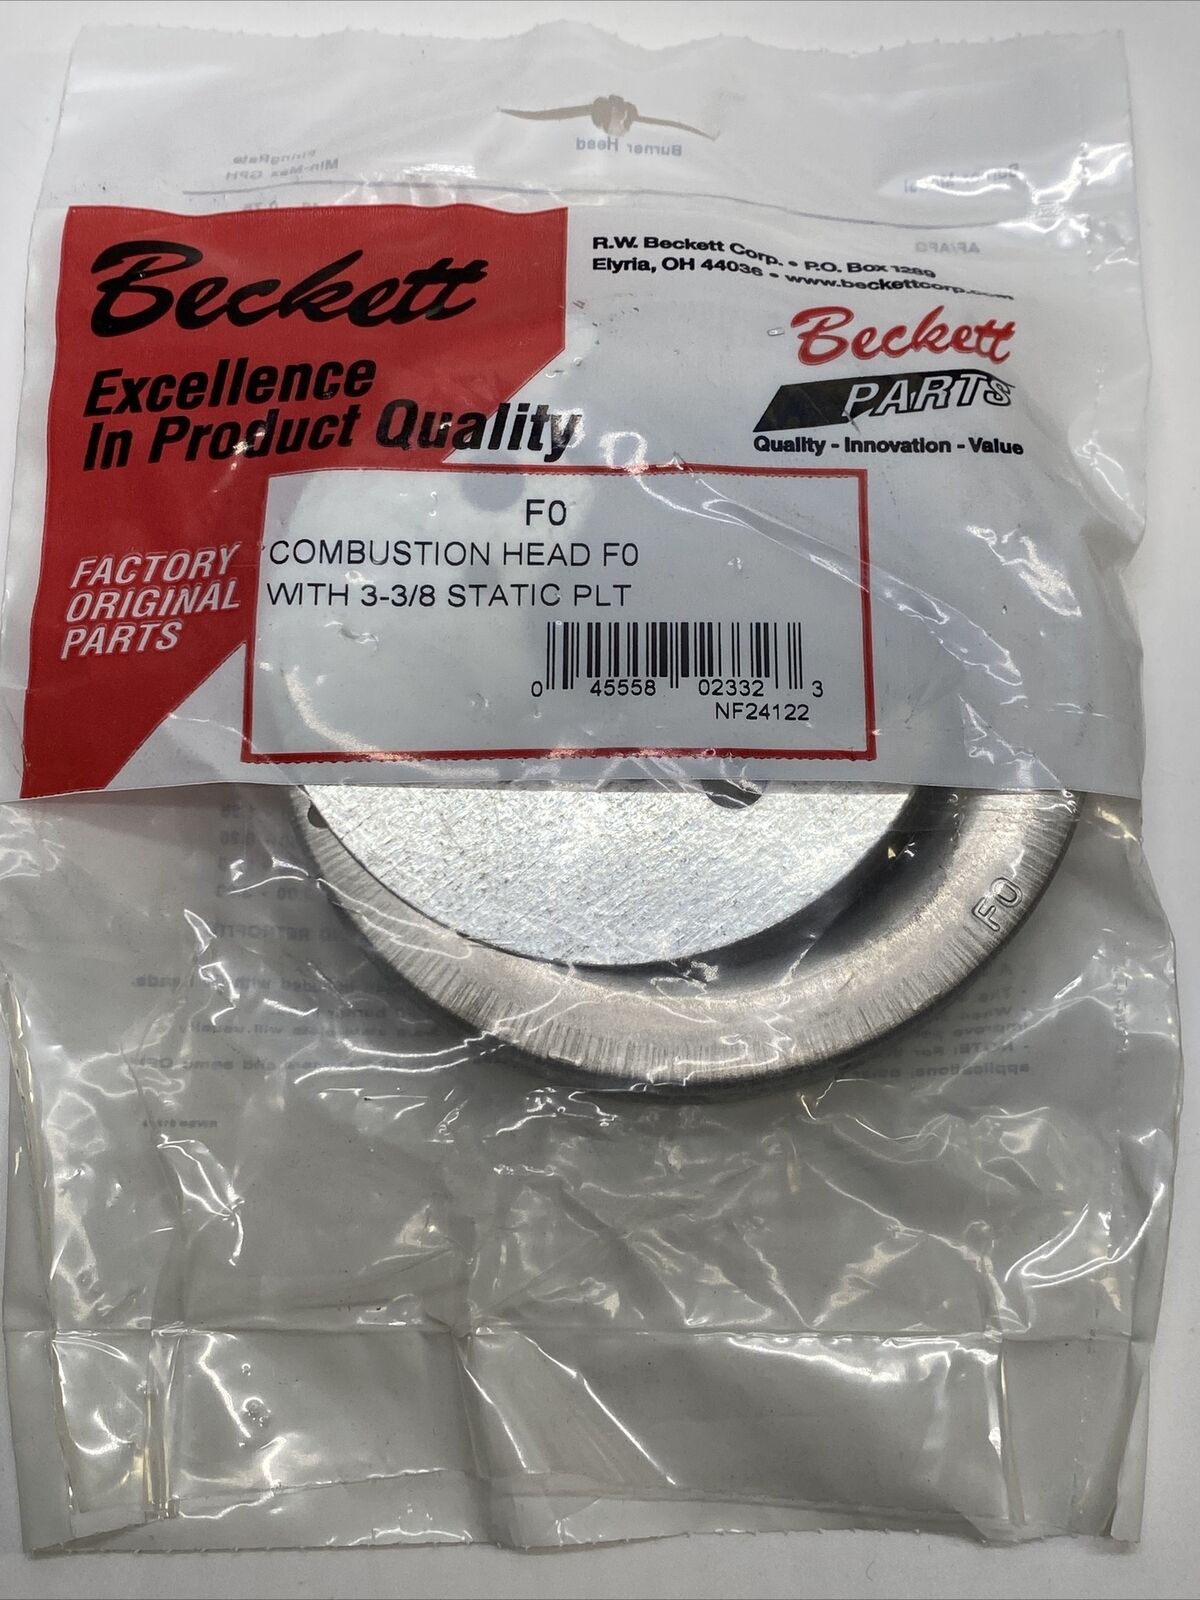 BECKETT COMBUSTION HEAD F0 - New Sealed